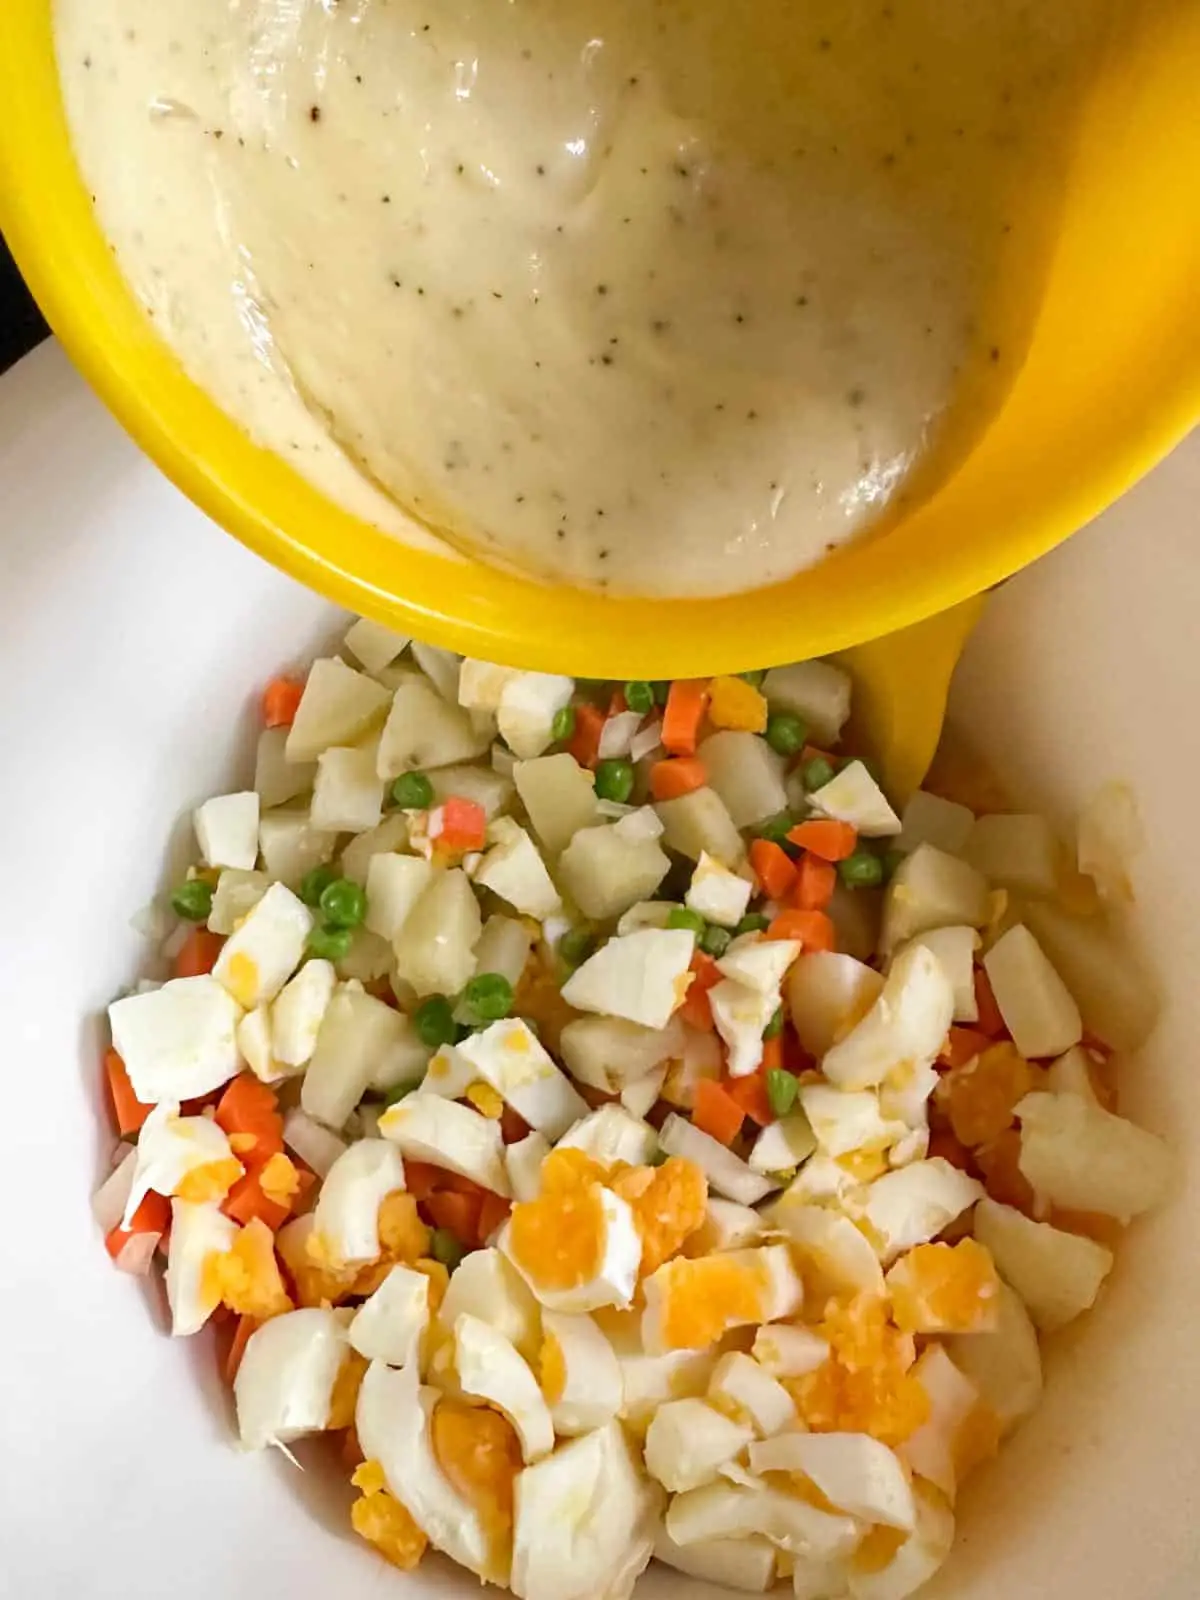 A white bowl containing chopped hard boiled egg, cut up pieces of boiled potato, diced carrots, and green peas. There is a yellow bowl containing a salad cream and mayo mixture poised over the white bowl.